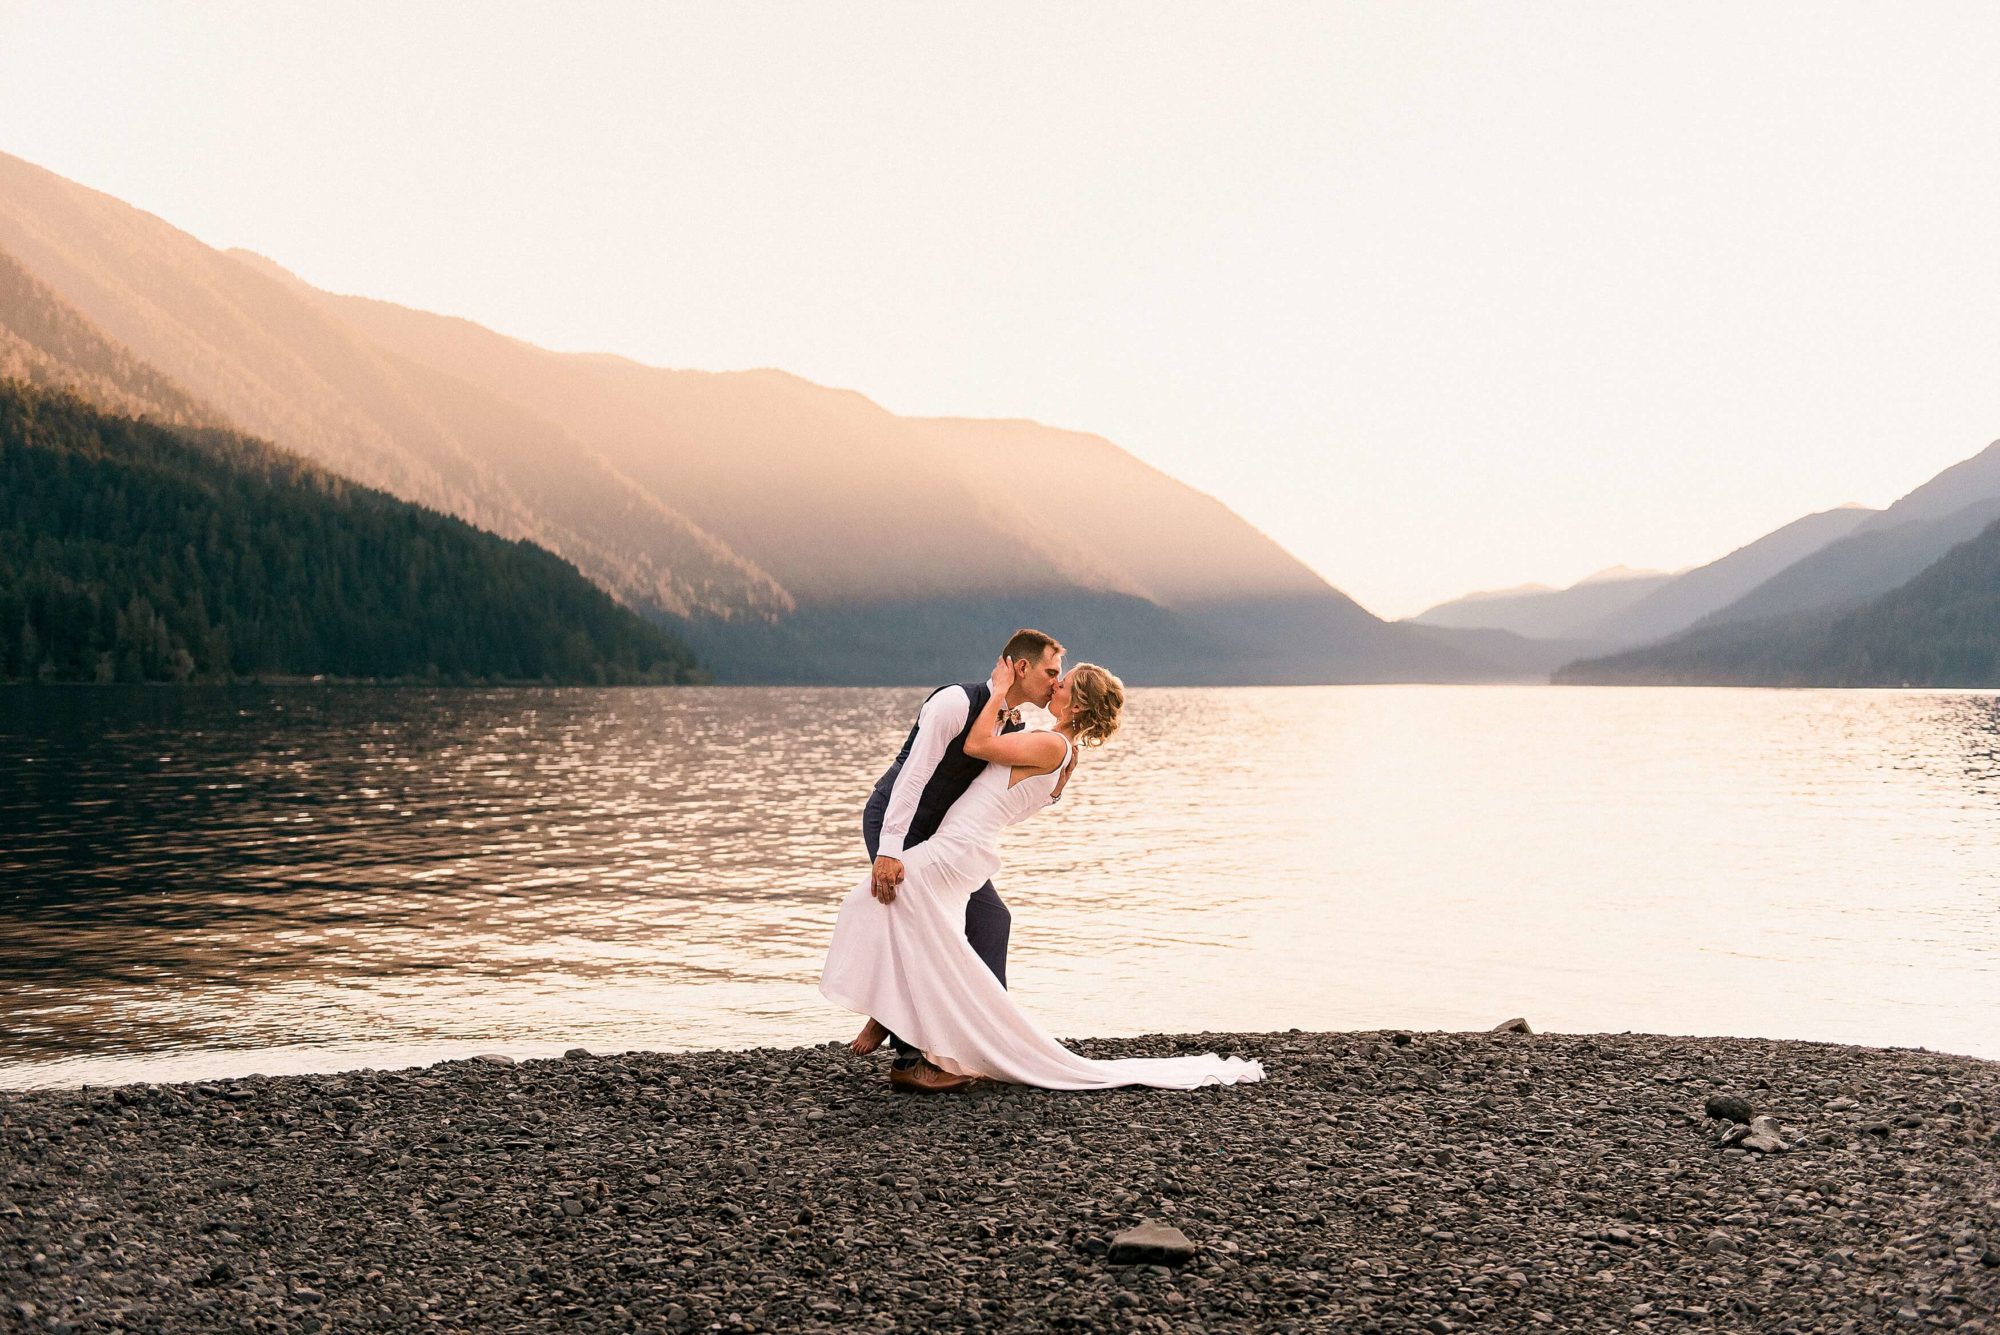 Bride and groom kissing on the beach at sunset at Lake Crescent